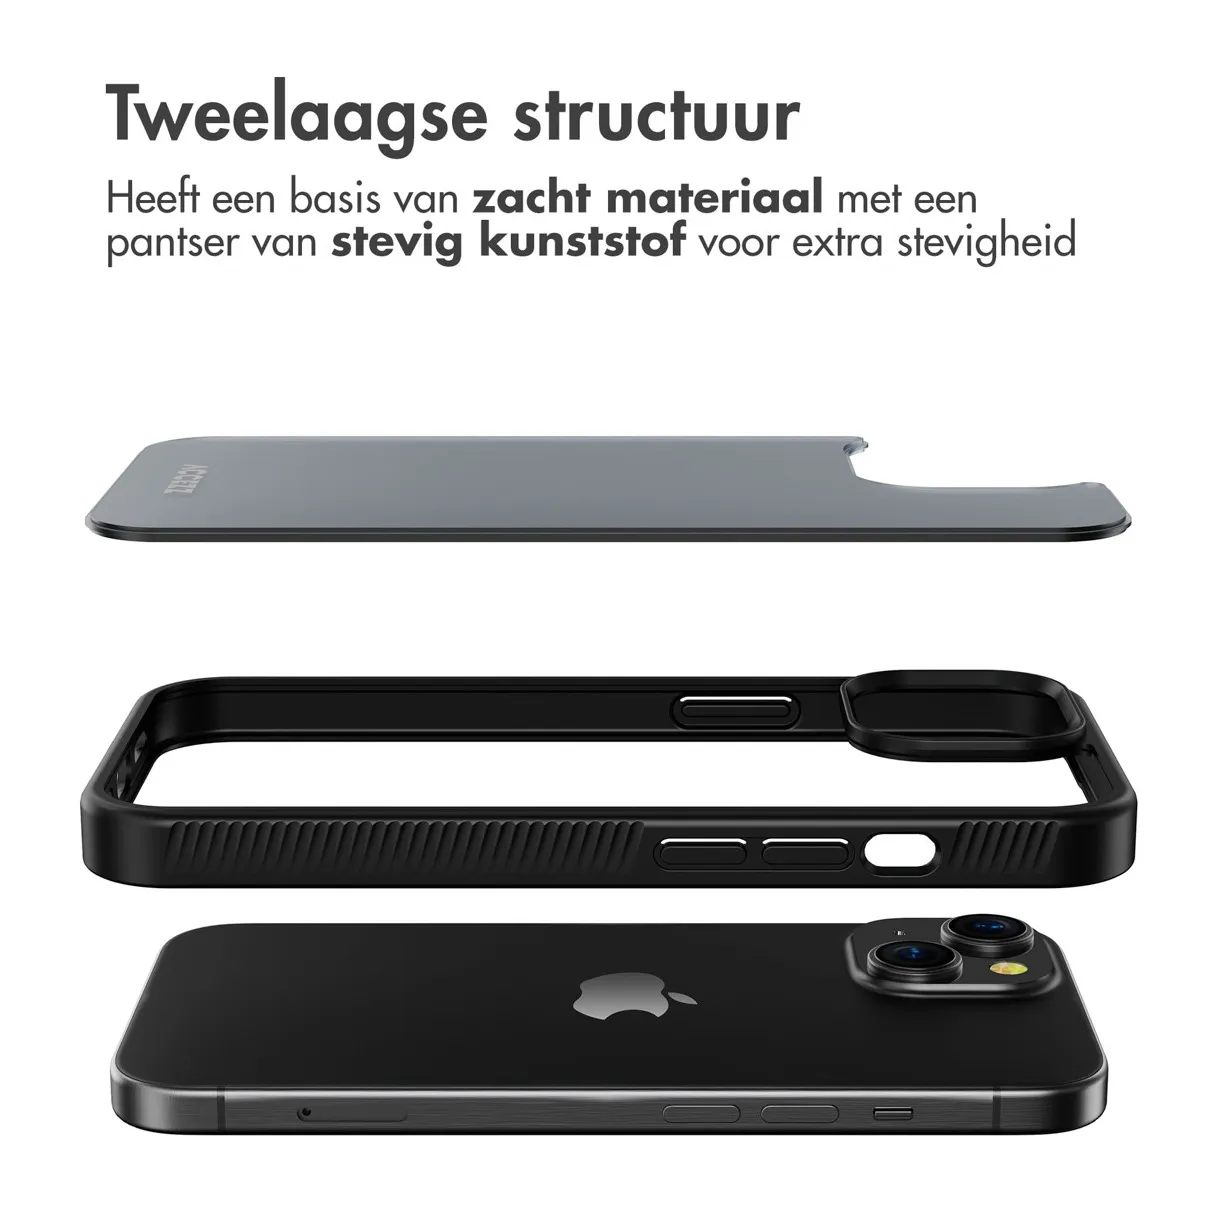 Accezz Rugged Frosted Backcover iPhone 15 Zwart